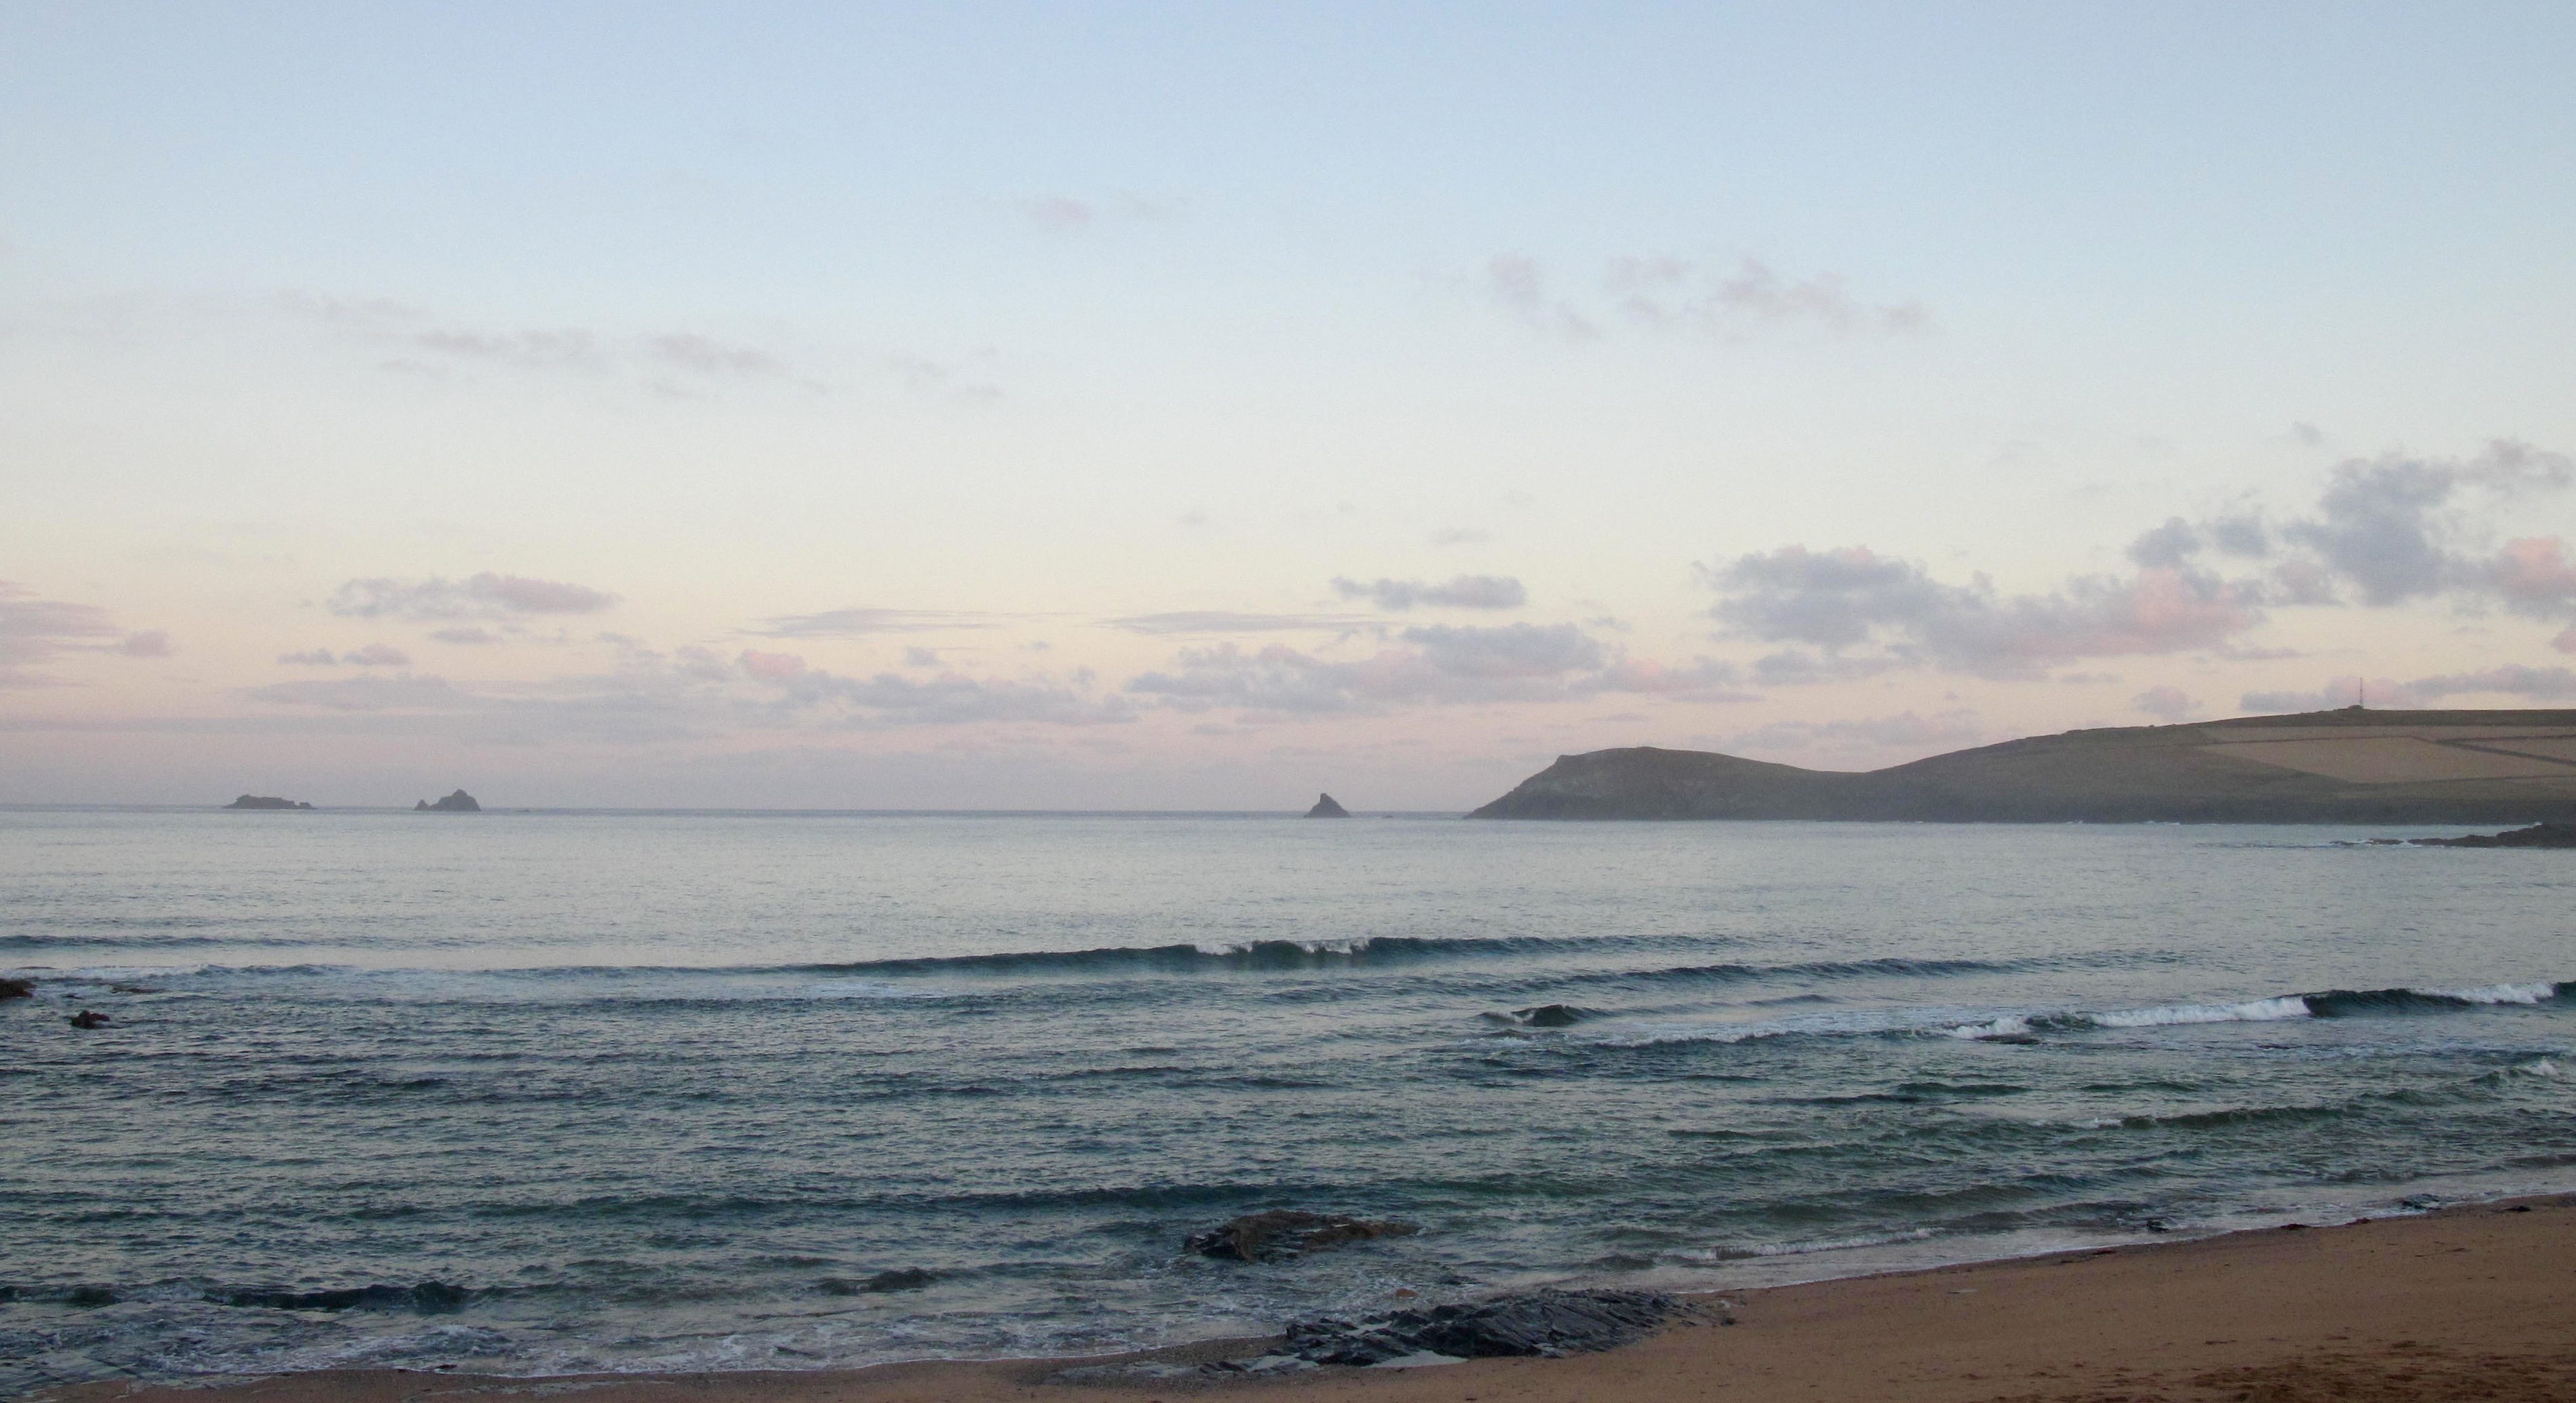 Surf Report for Tuesday 18th August 2015